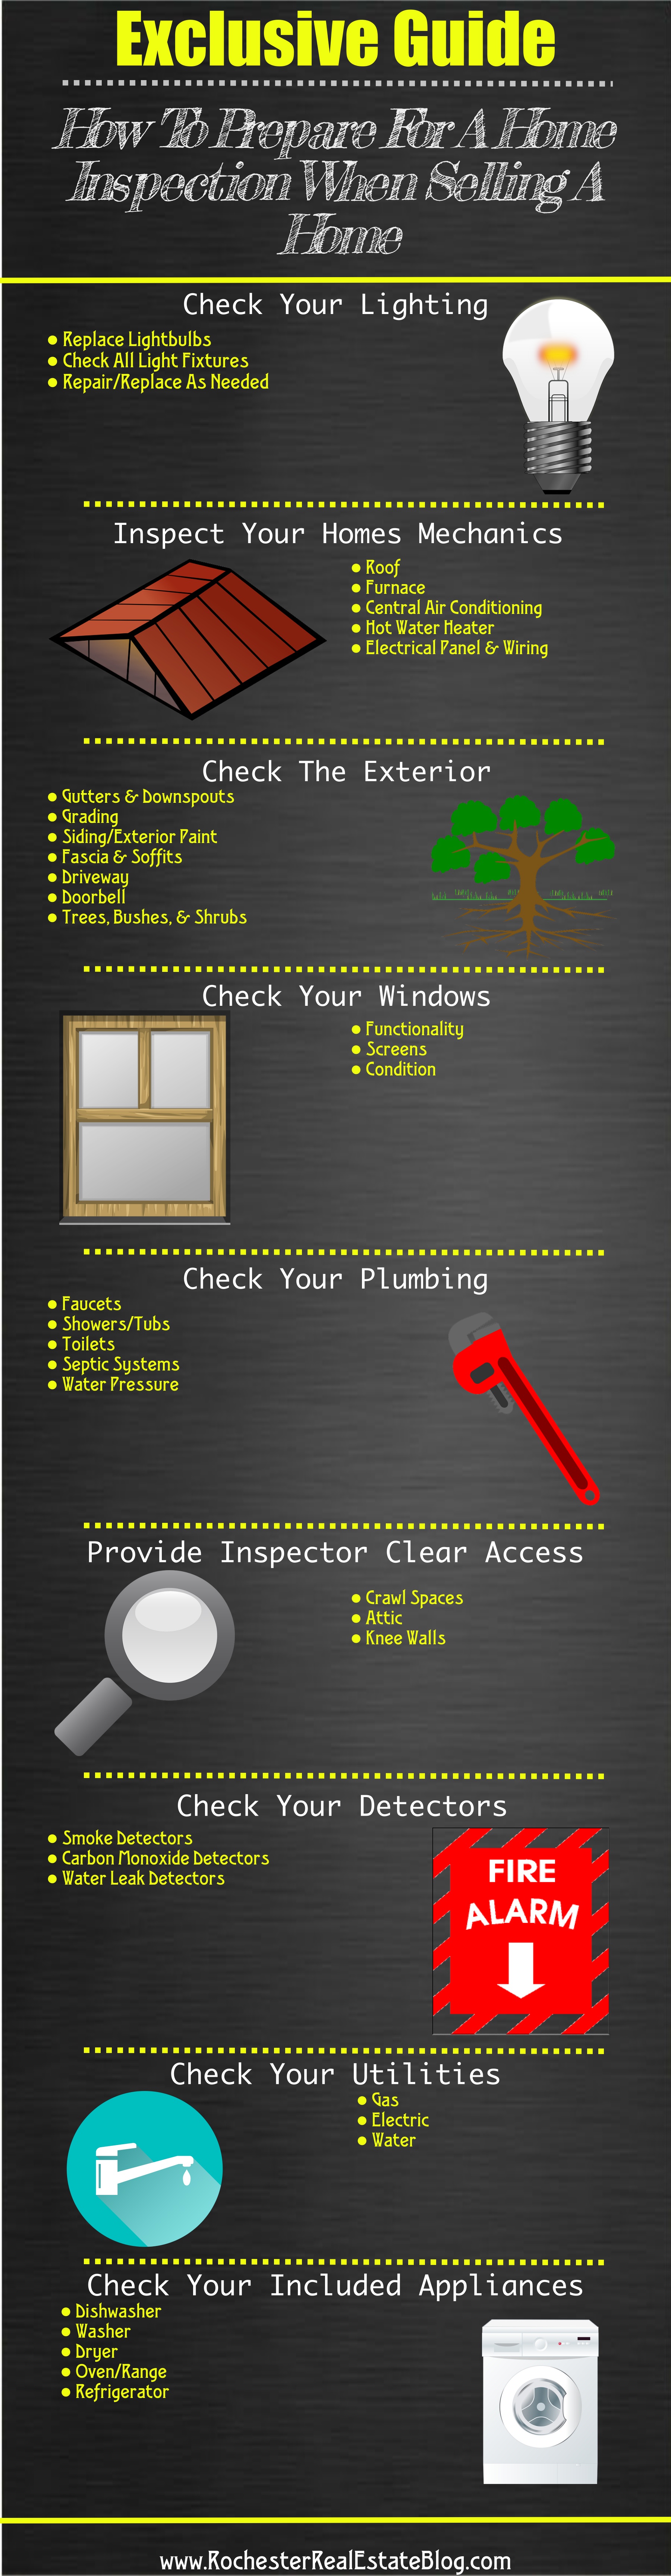 Exclusive Guide On How To Prepare For A Home Inspection When Selling A Home